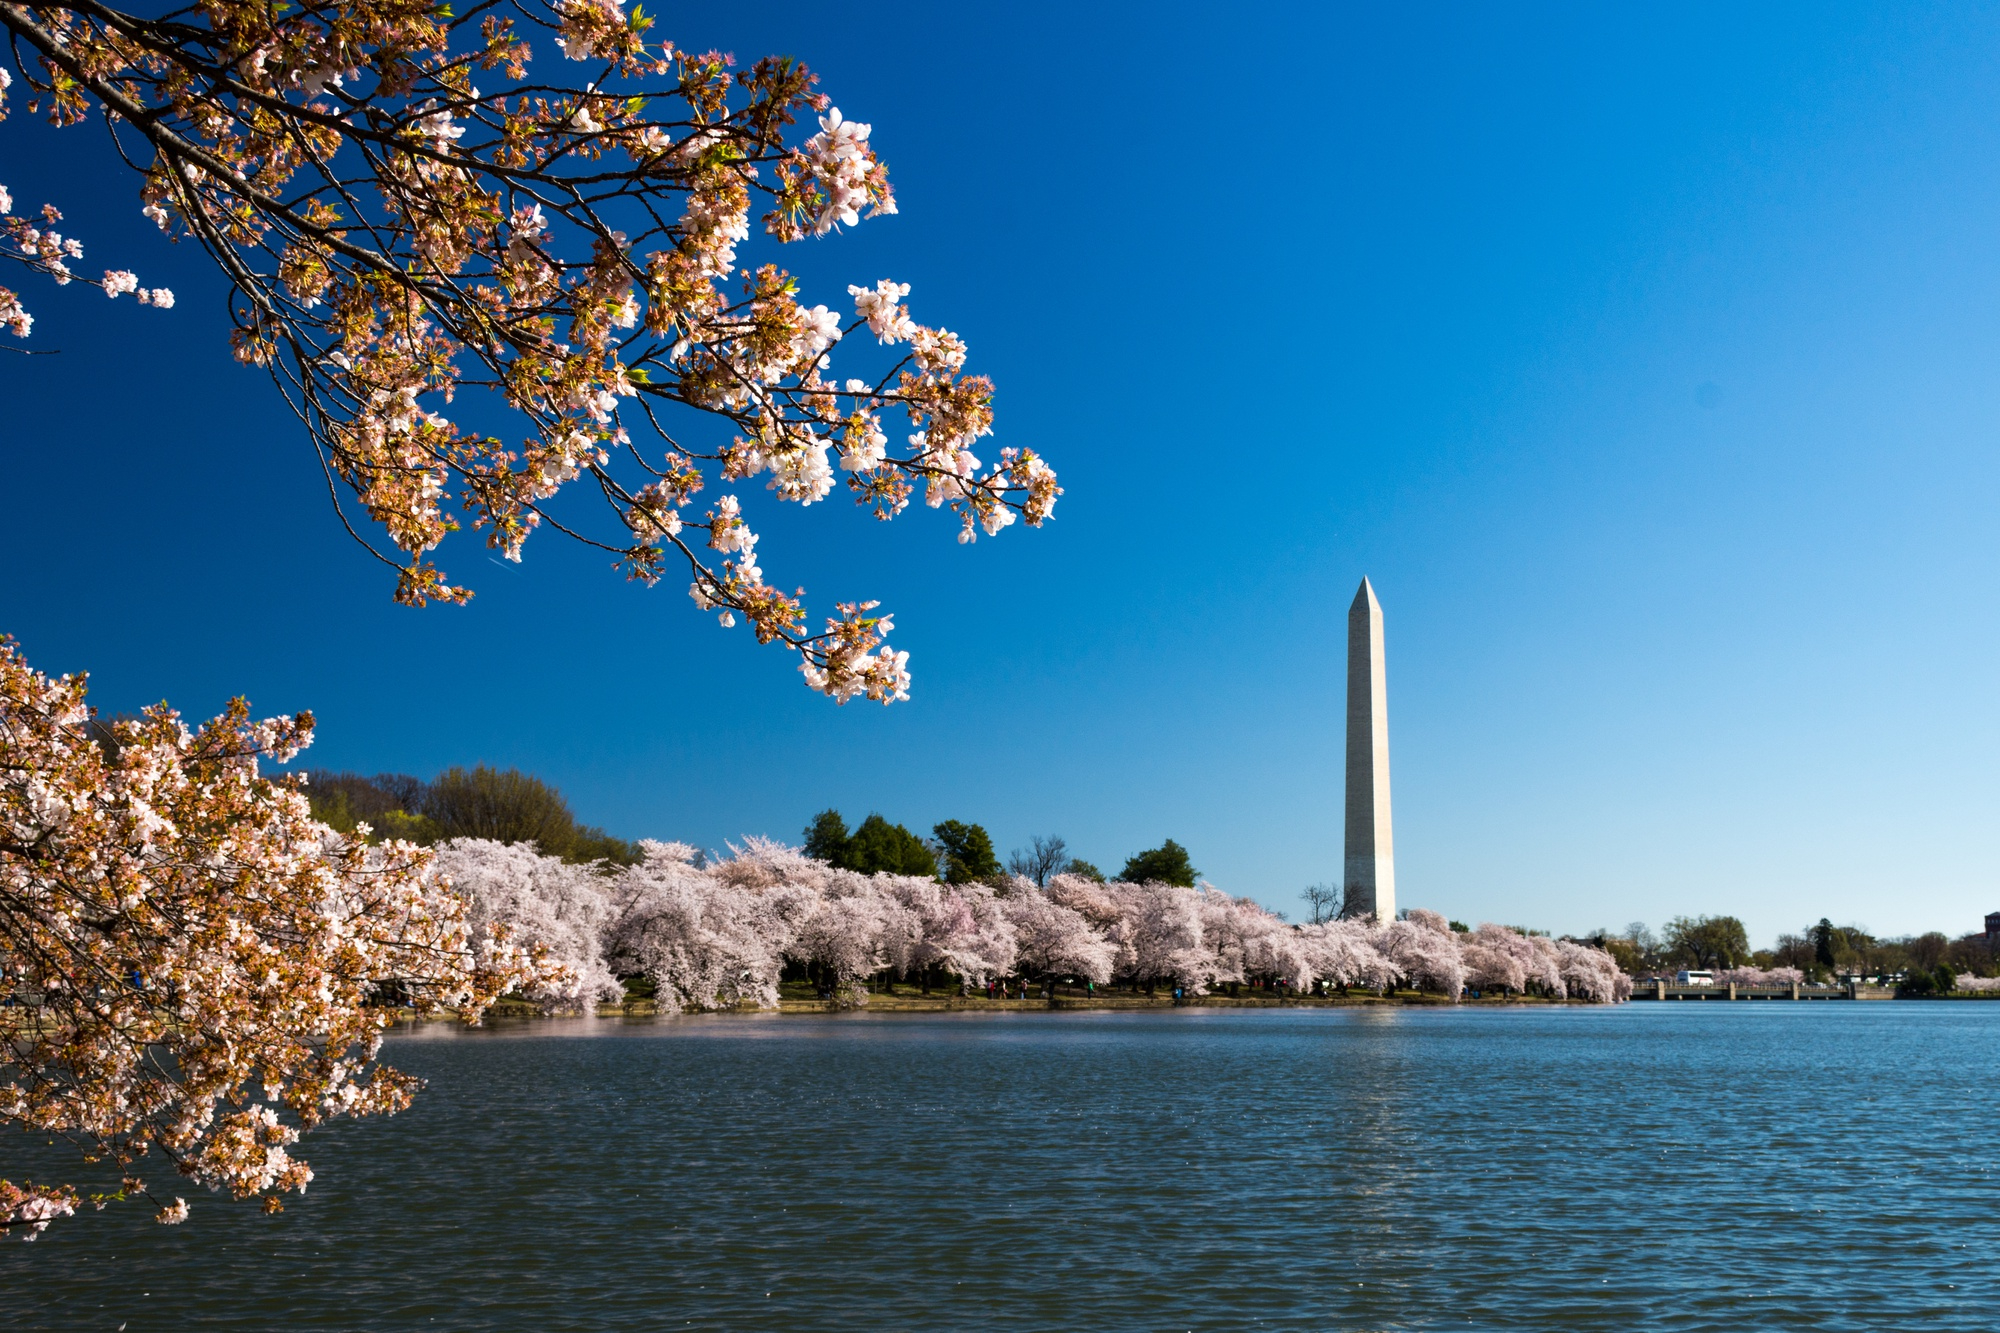 national-mall-surrounded-by-cherry-blossoms-lake-sunlight-washington-dc